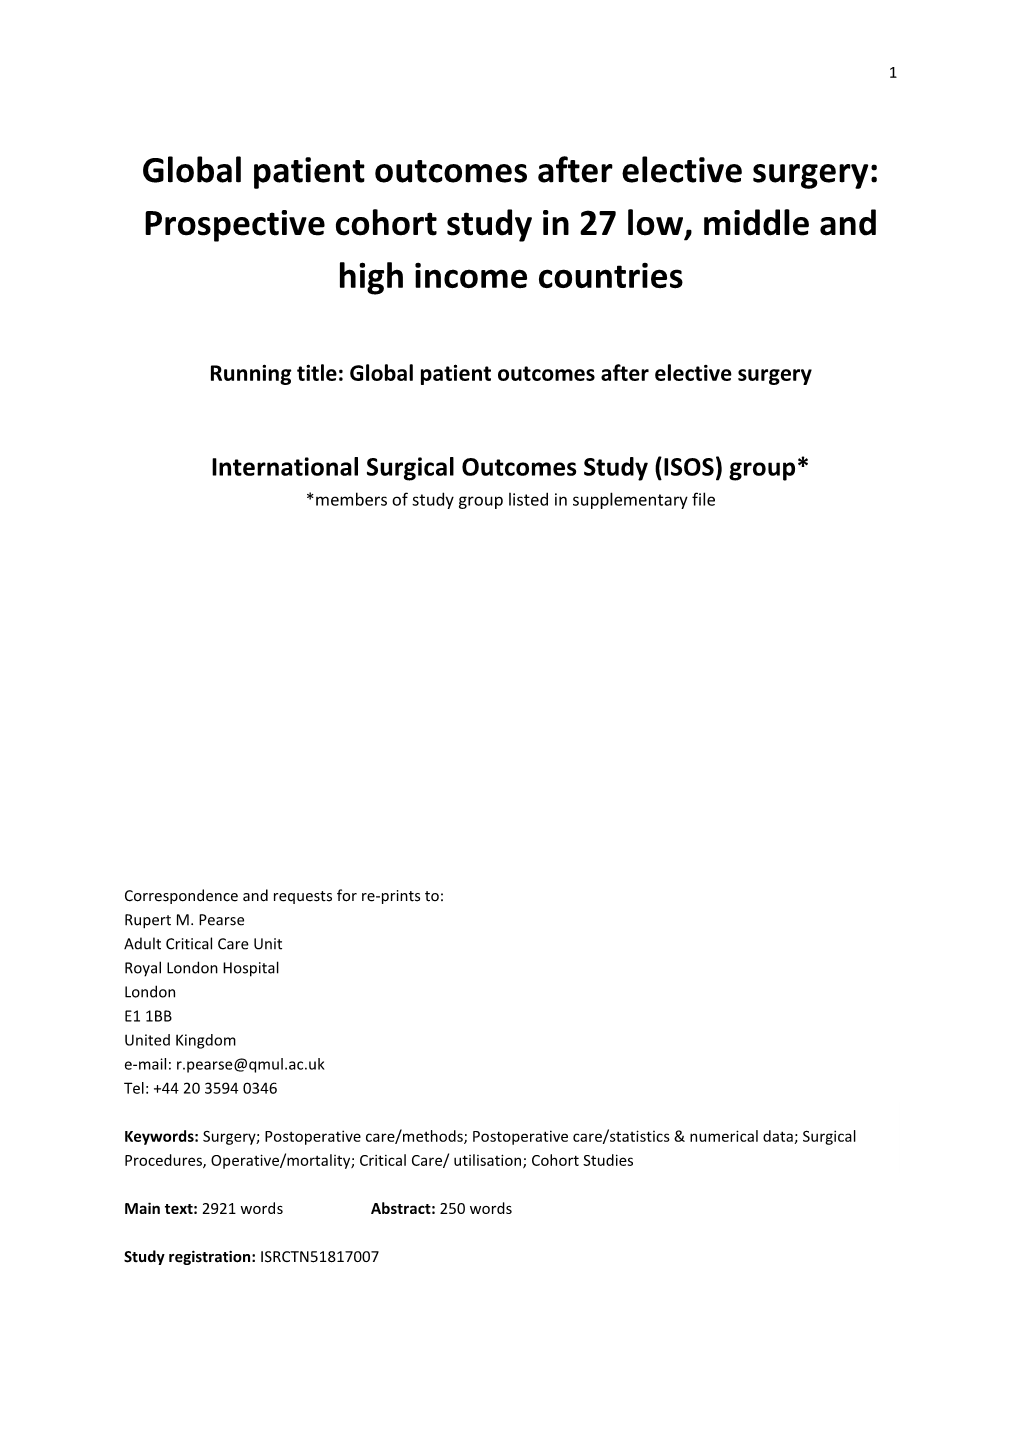 Global Patient Outcomes After Elective Surgery: Prospective Cohort Study in 27 Low, Middle and High Income Countries